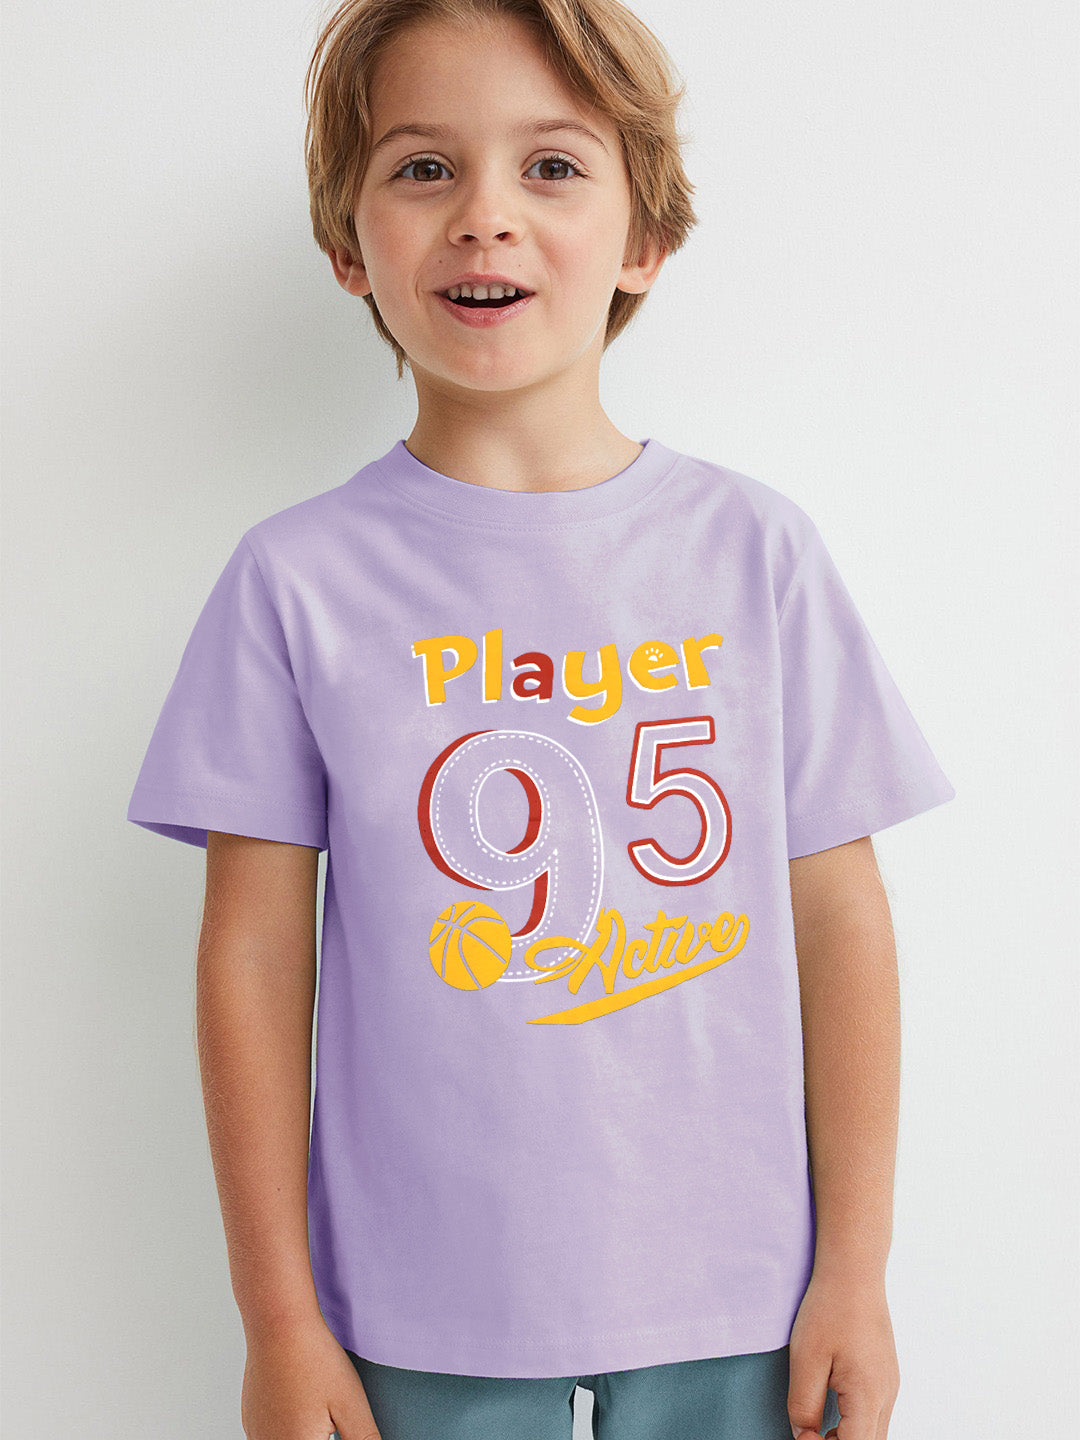 Print-AN For Kids-Purple Summer BrandsEgo With Single - Neck Shirt Crew Tee Jersey